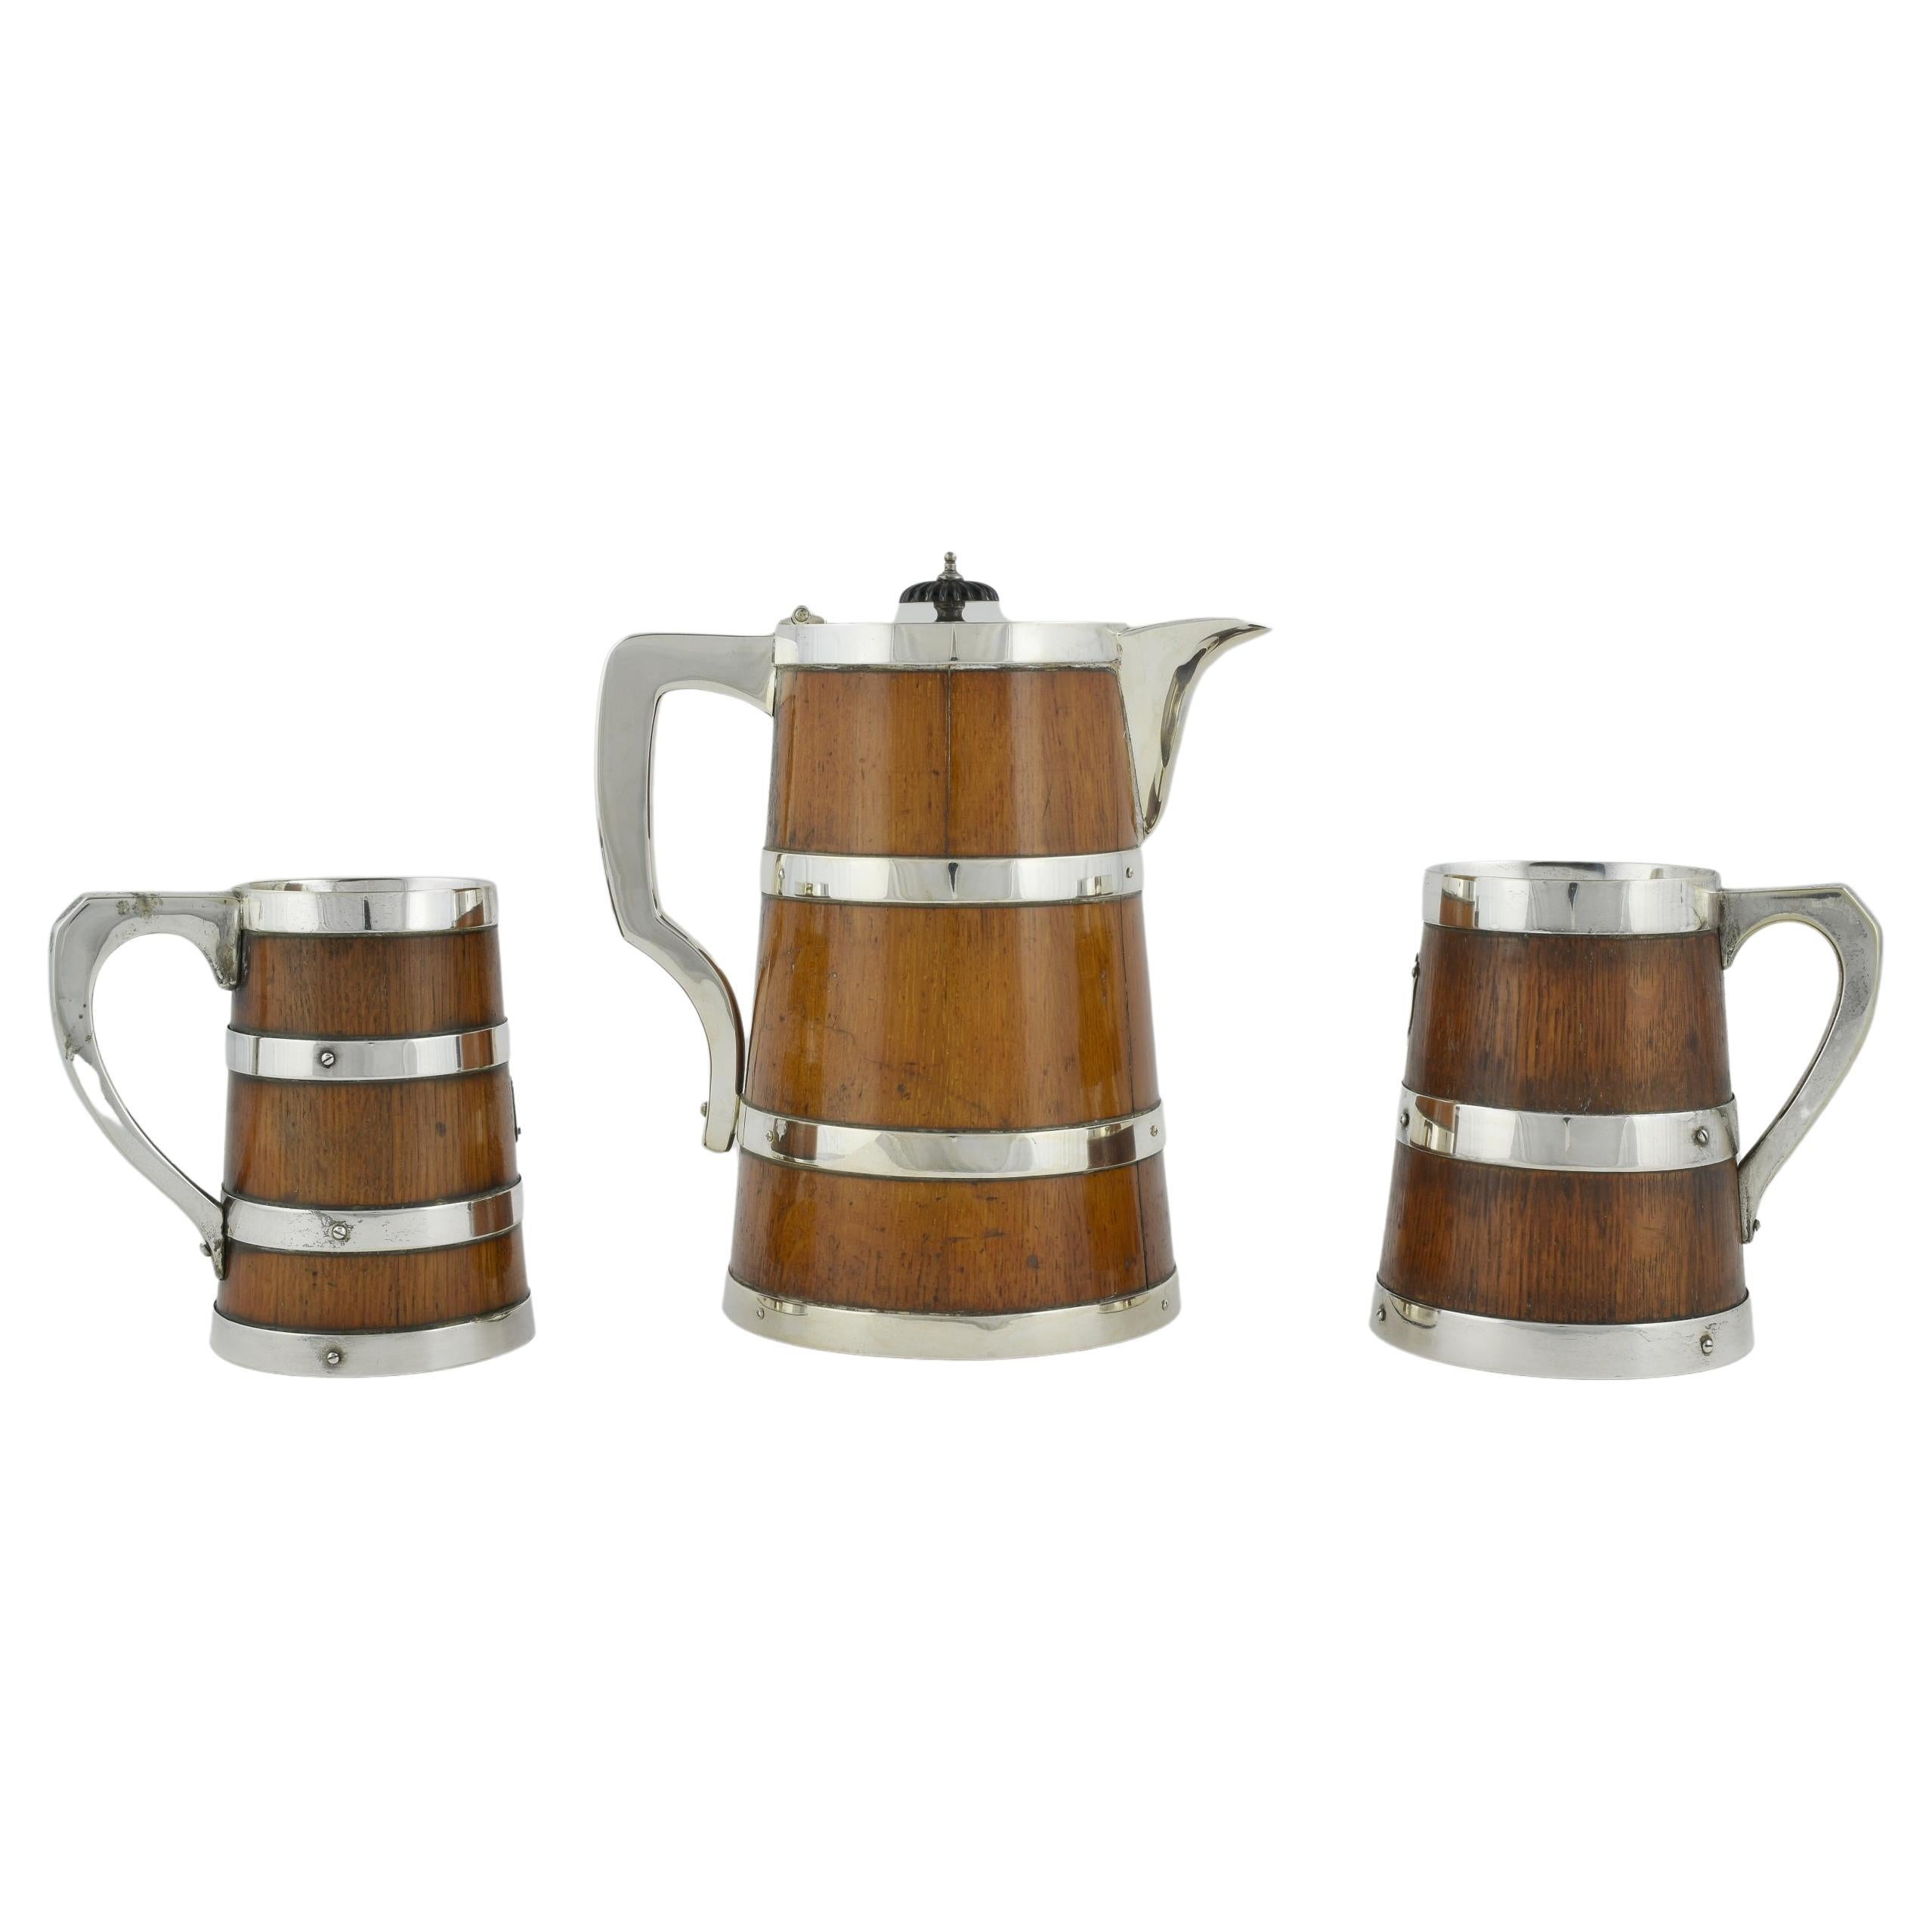 A Pitcher and two tankards